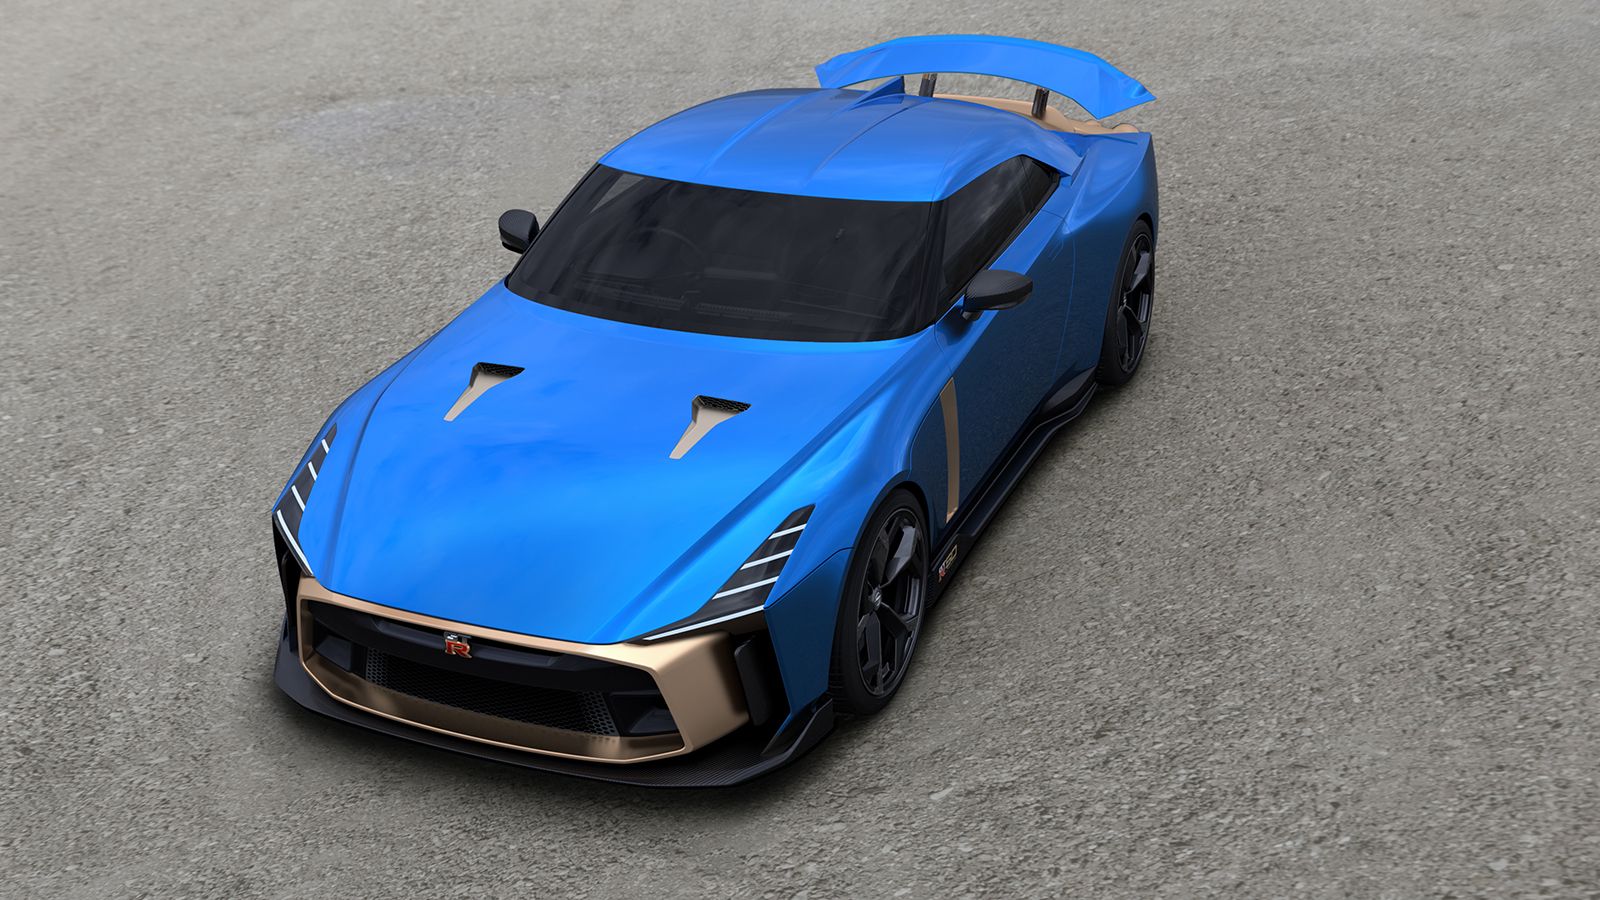 Image Gallery of the Nissan GT-R50 Concept – Robb Report